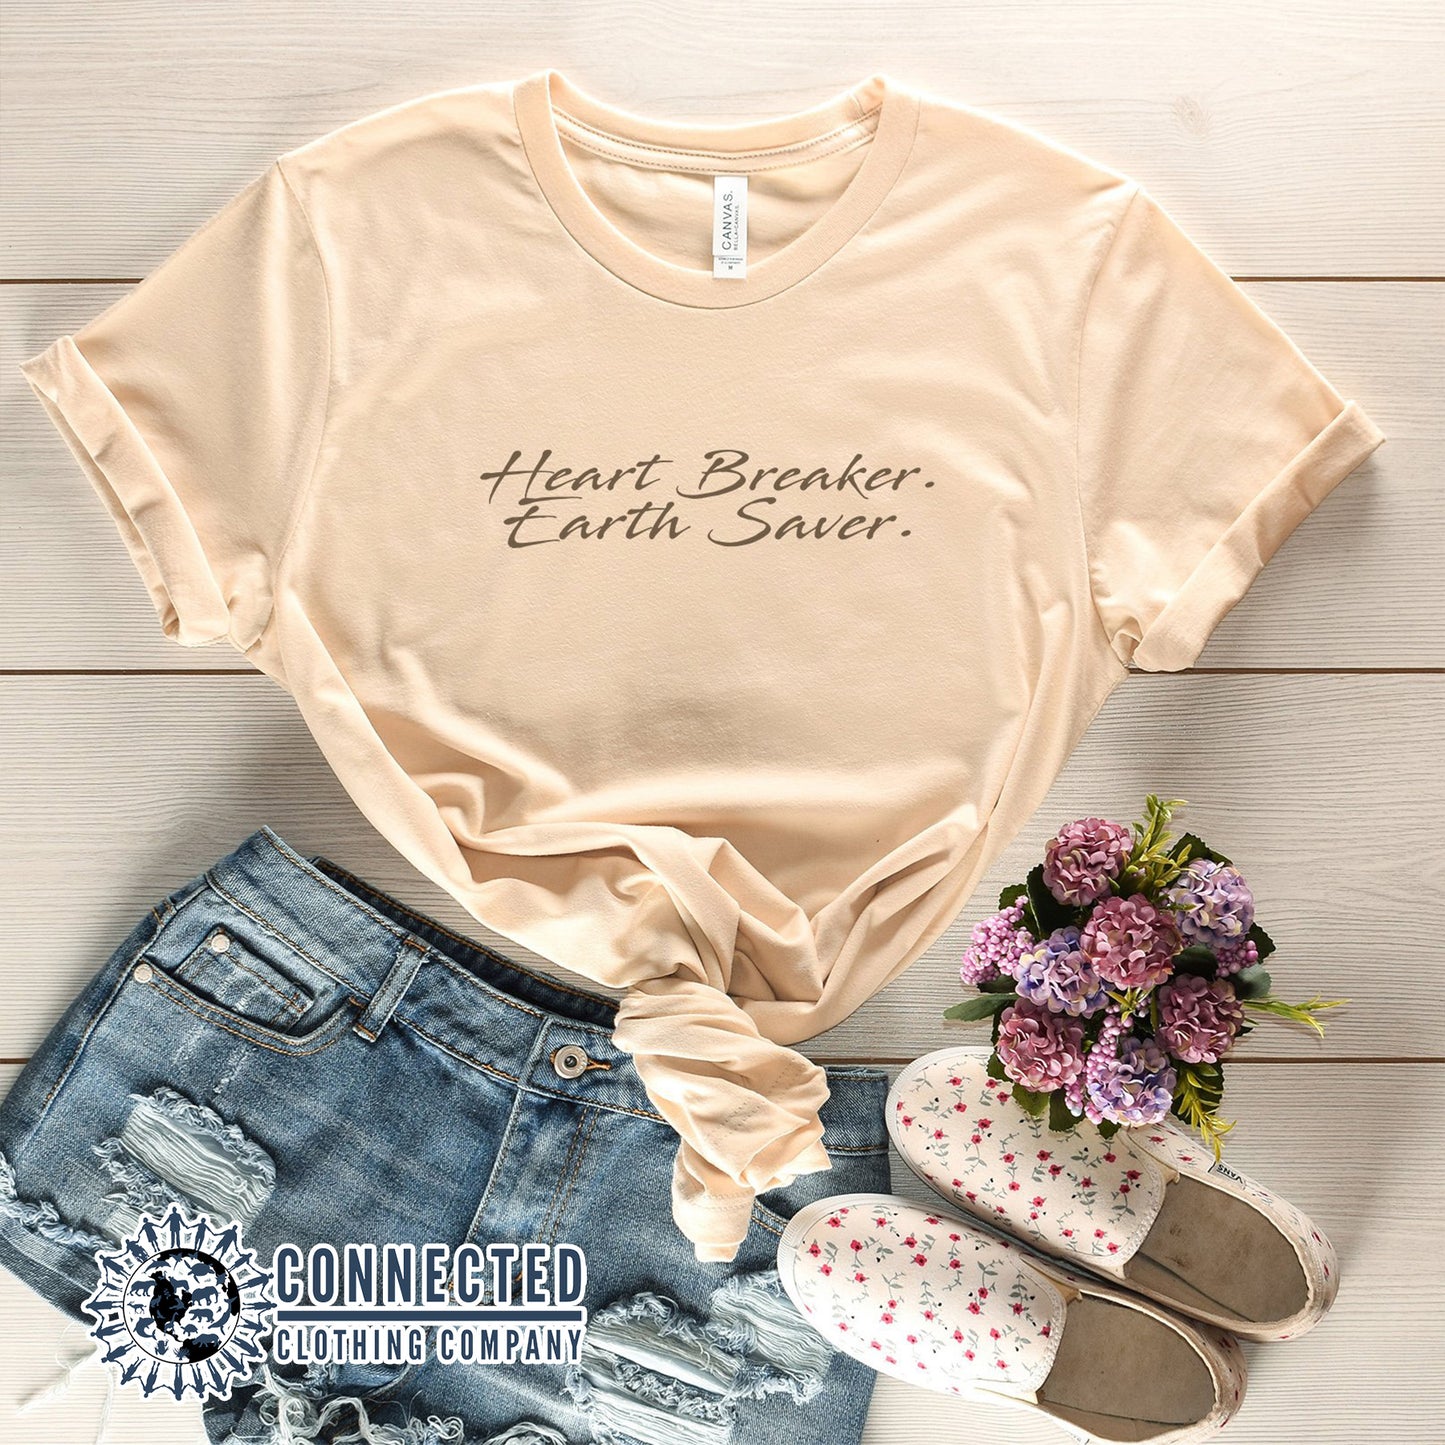 Soft Cream Heart Breaker. Earth Saver. Short-Sleeve Tee - Connected Clothing Company - Ethically and Sustainably Made - 10% of profits donated to ocean conservation